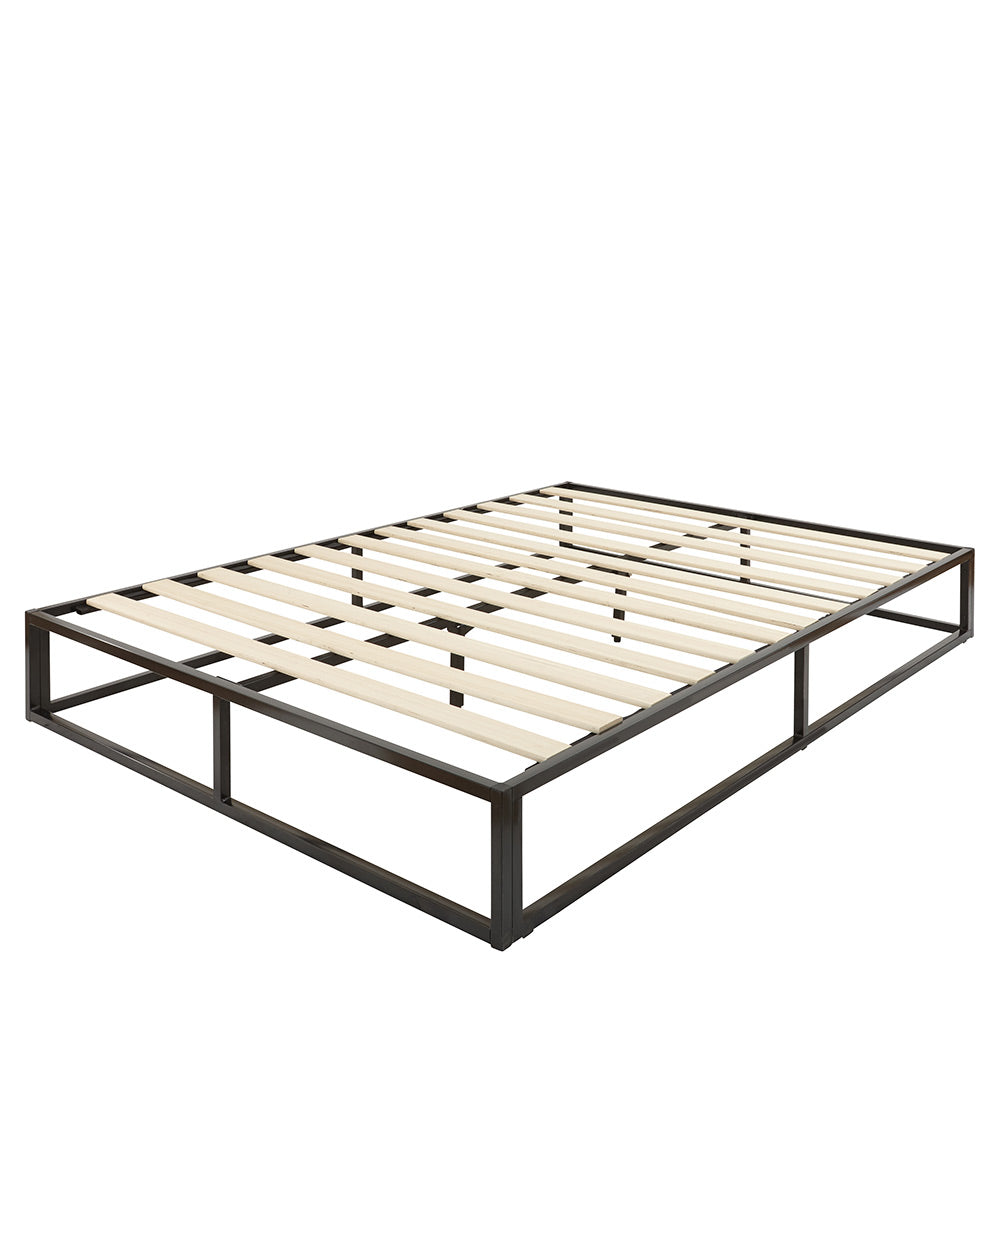 full photo of this bed frame on a white background side view